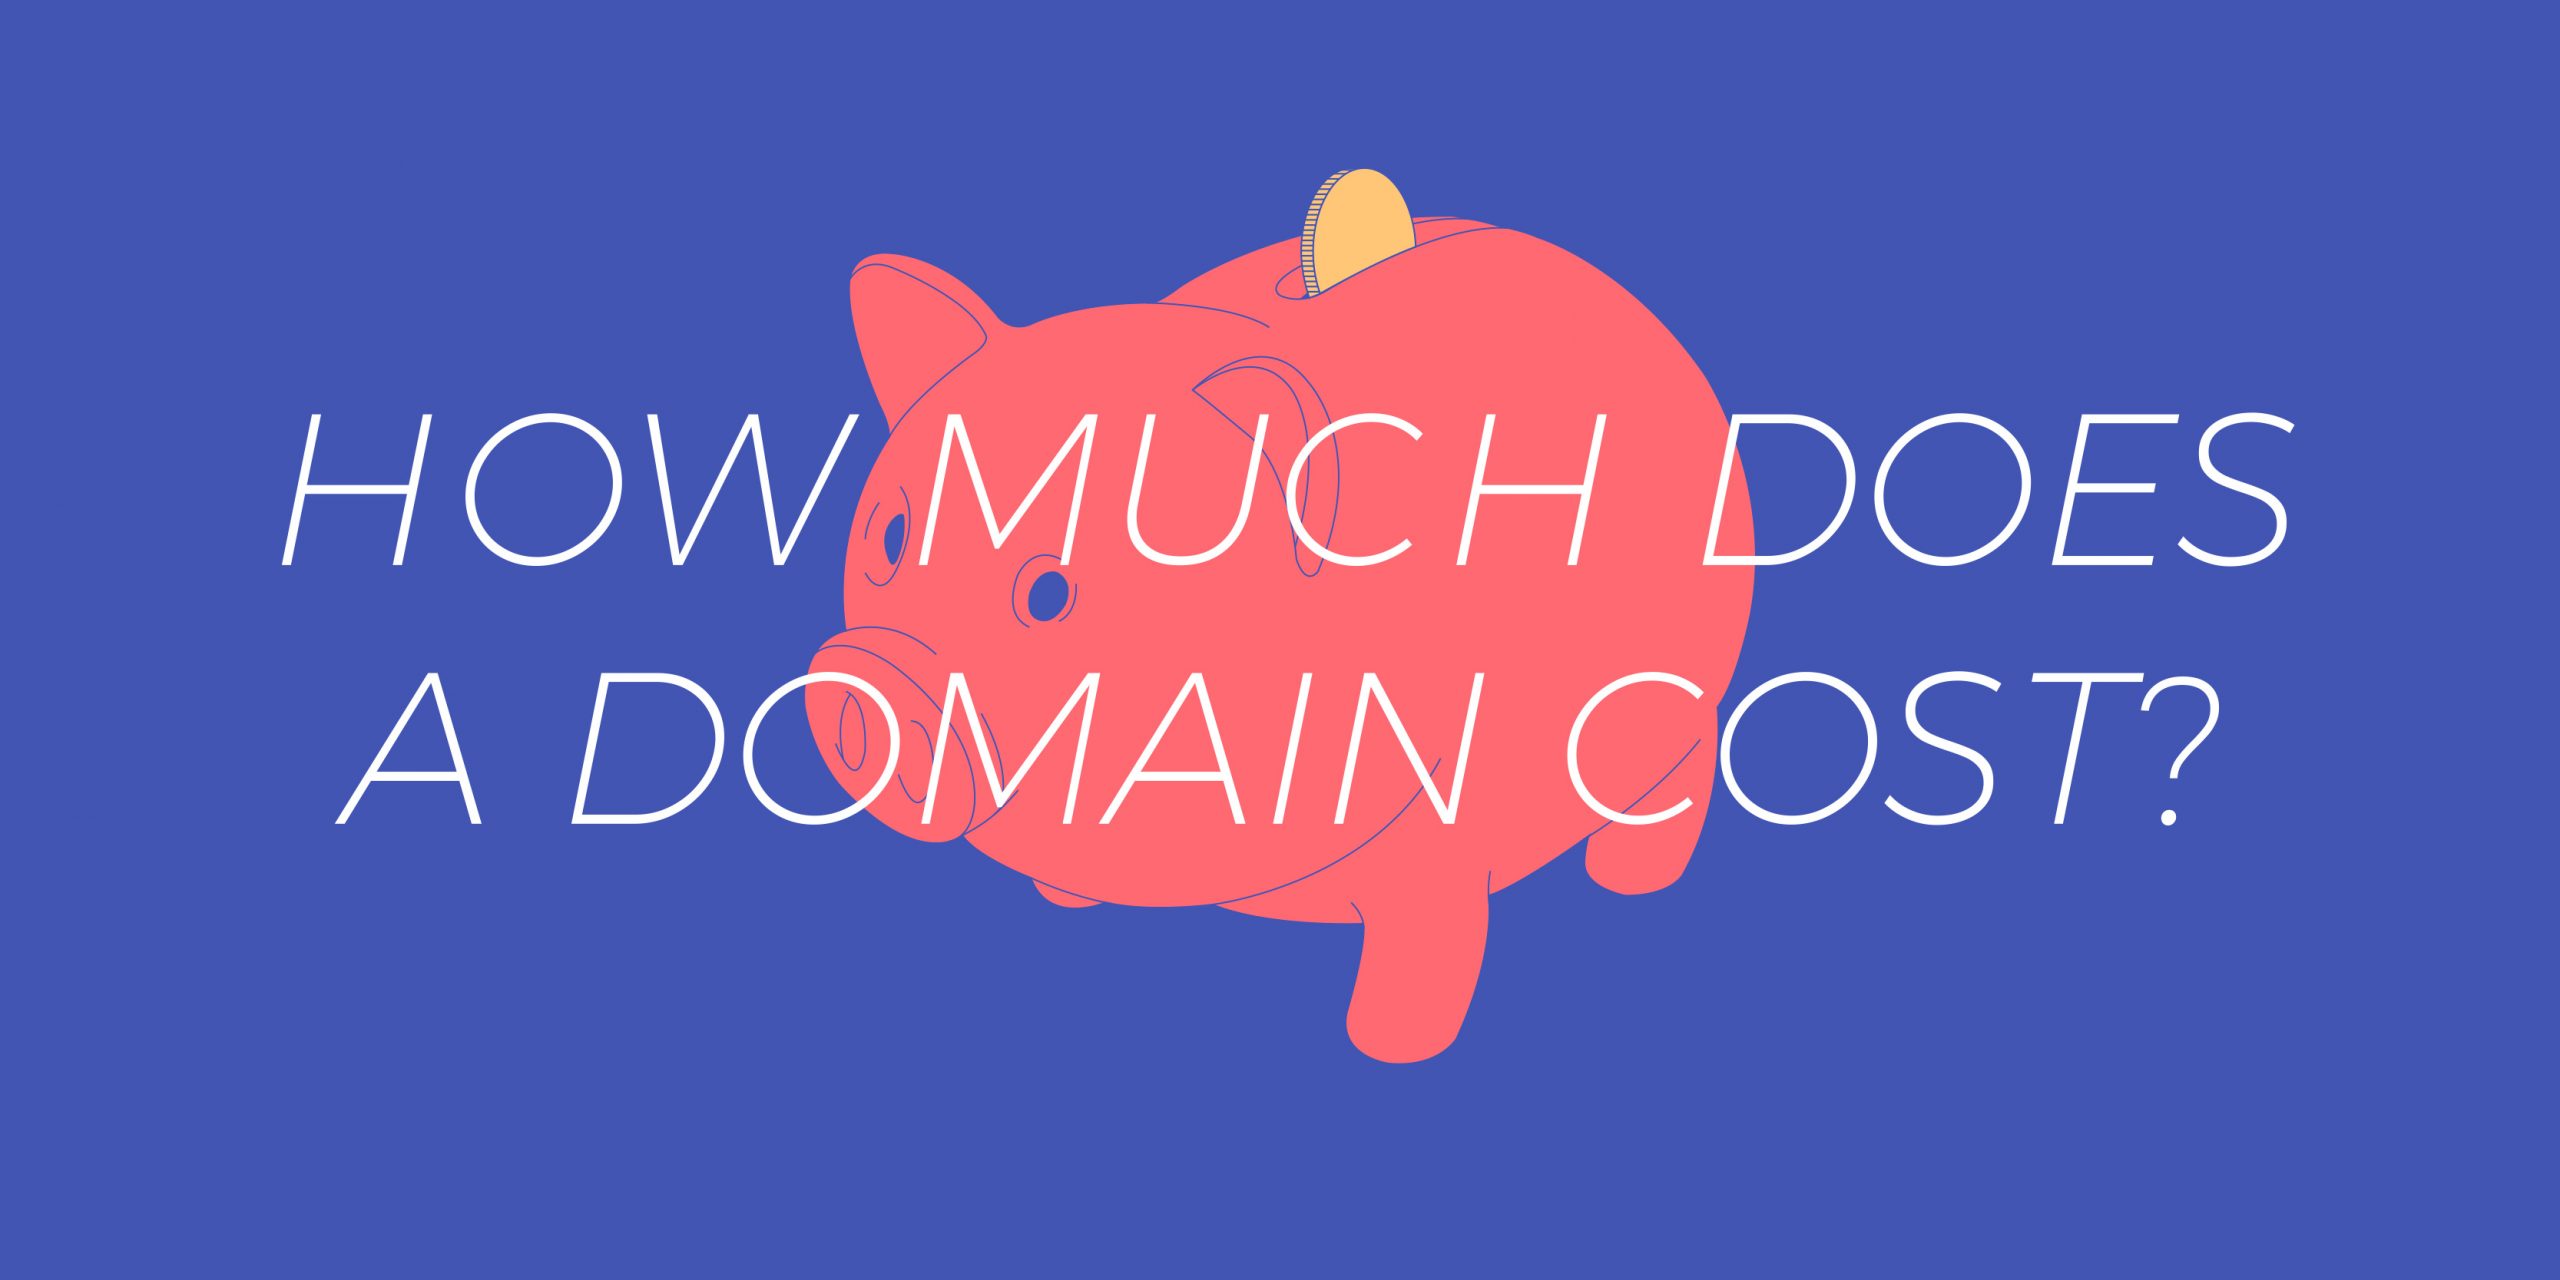 How much does a domain cost and what comes with it?